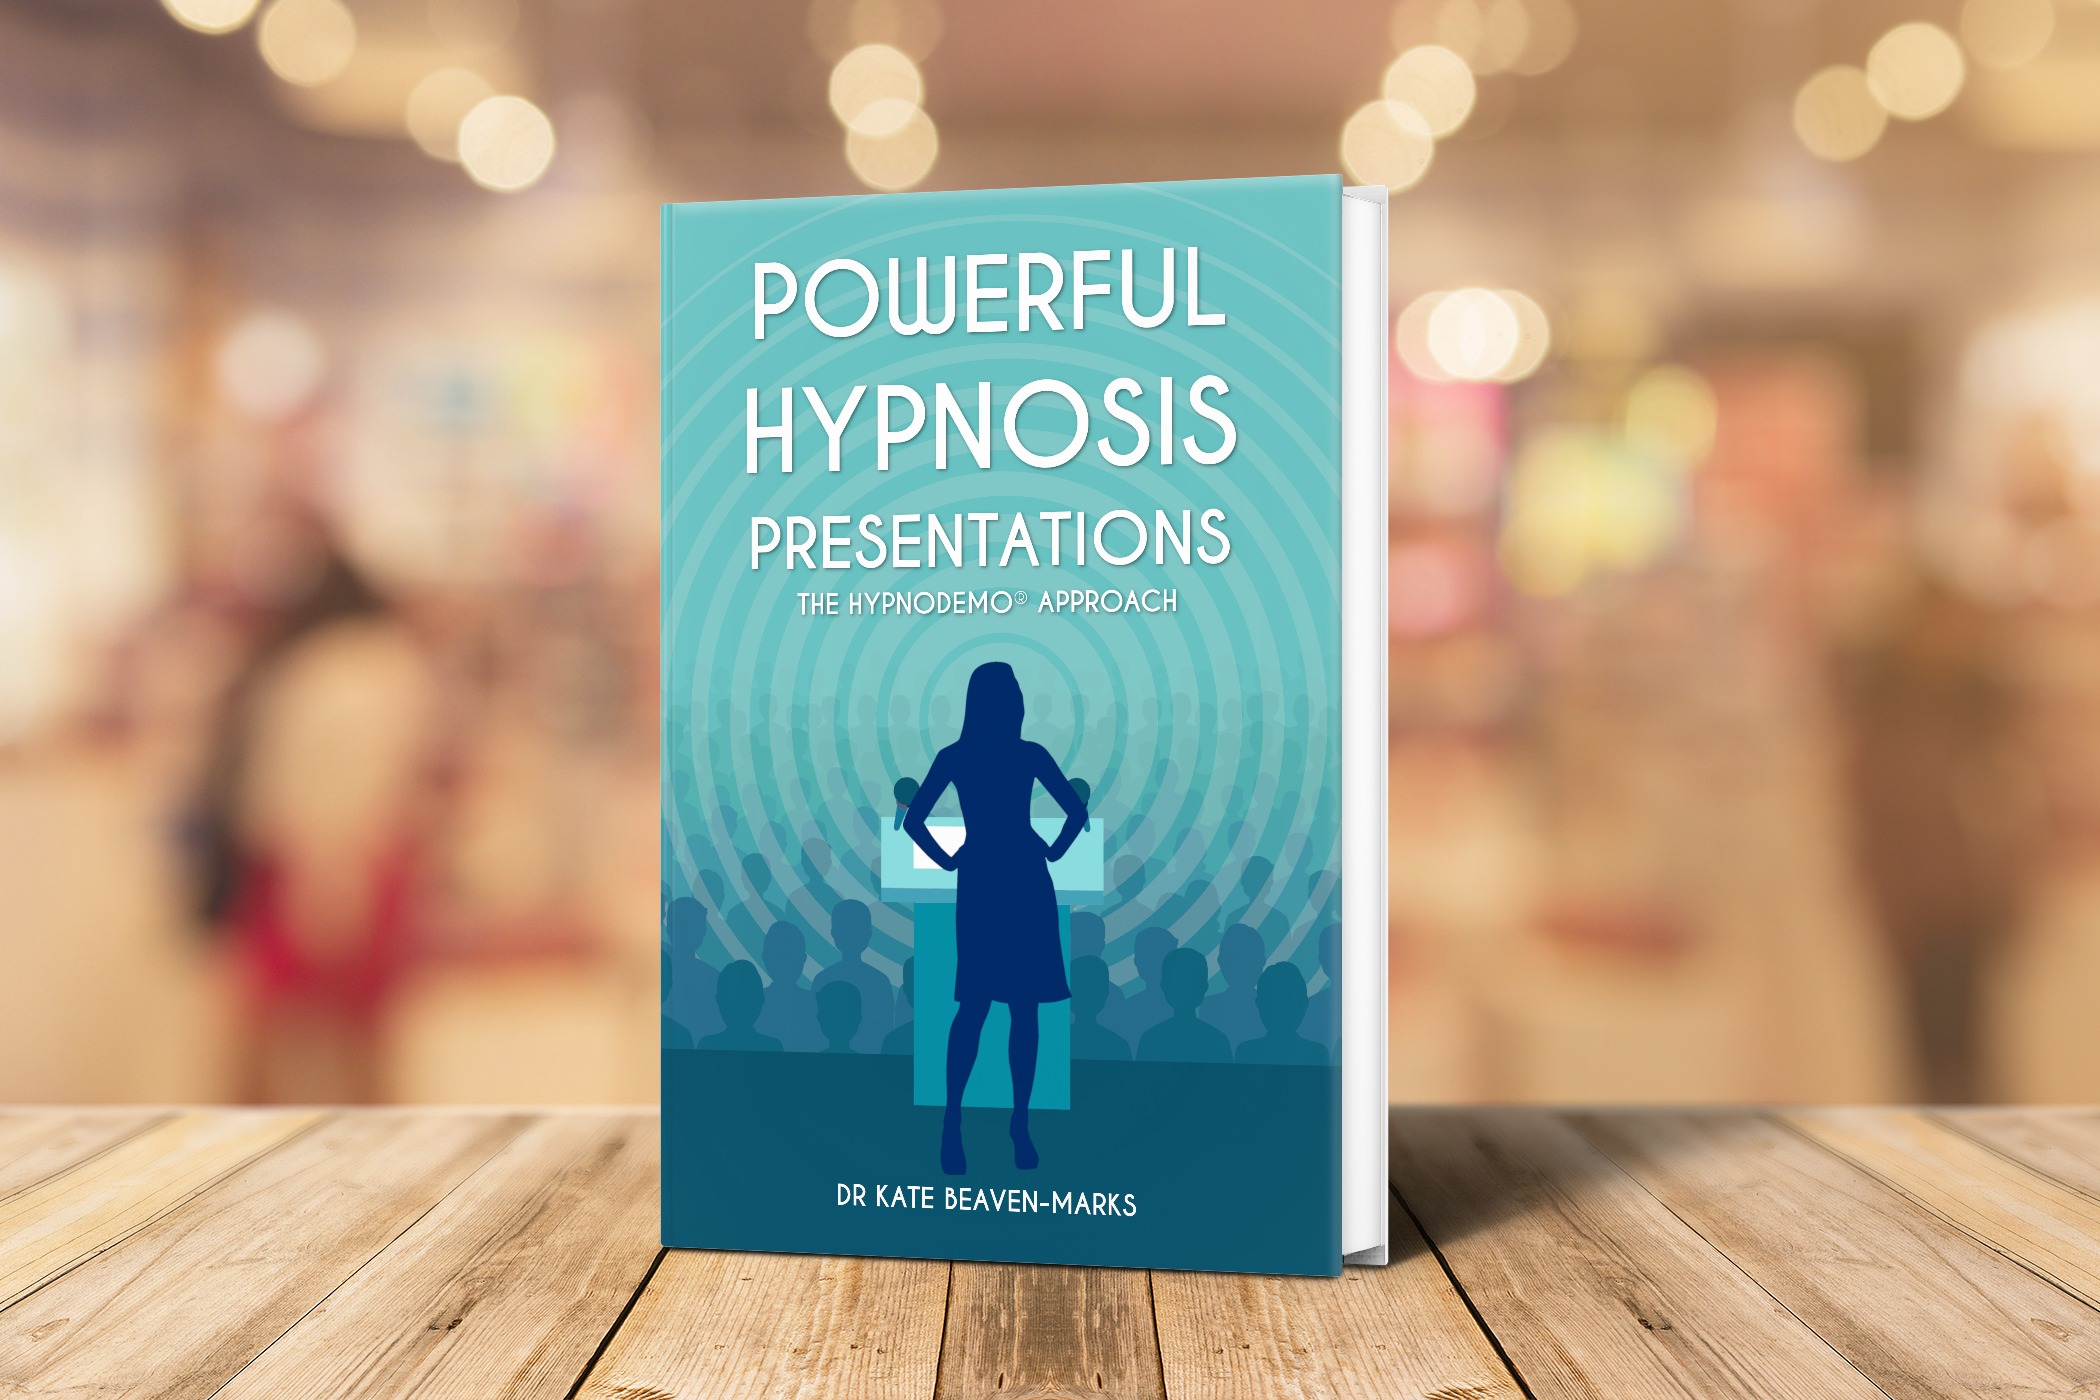 Powerful Hypnosis Presentations, the Hypnodemo approach by Dr Kate Beaven-Marks